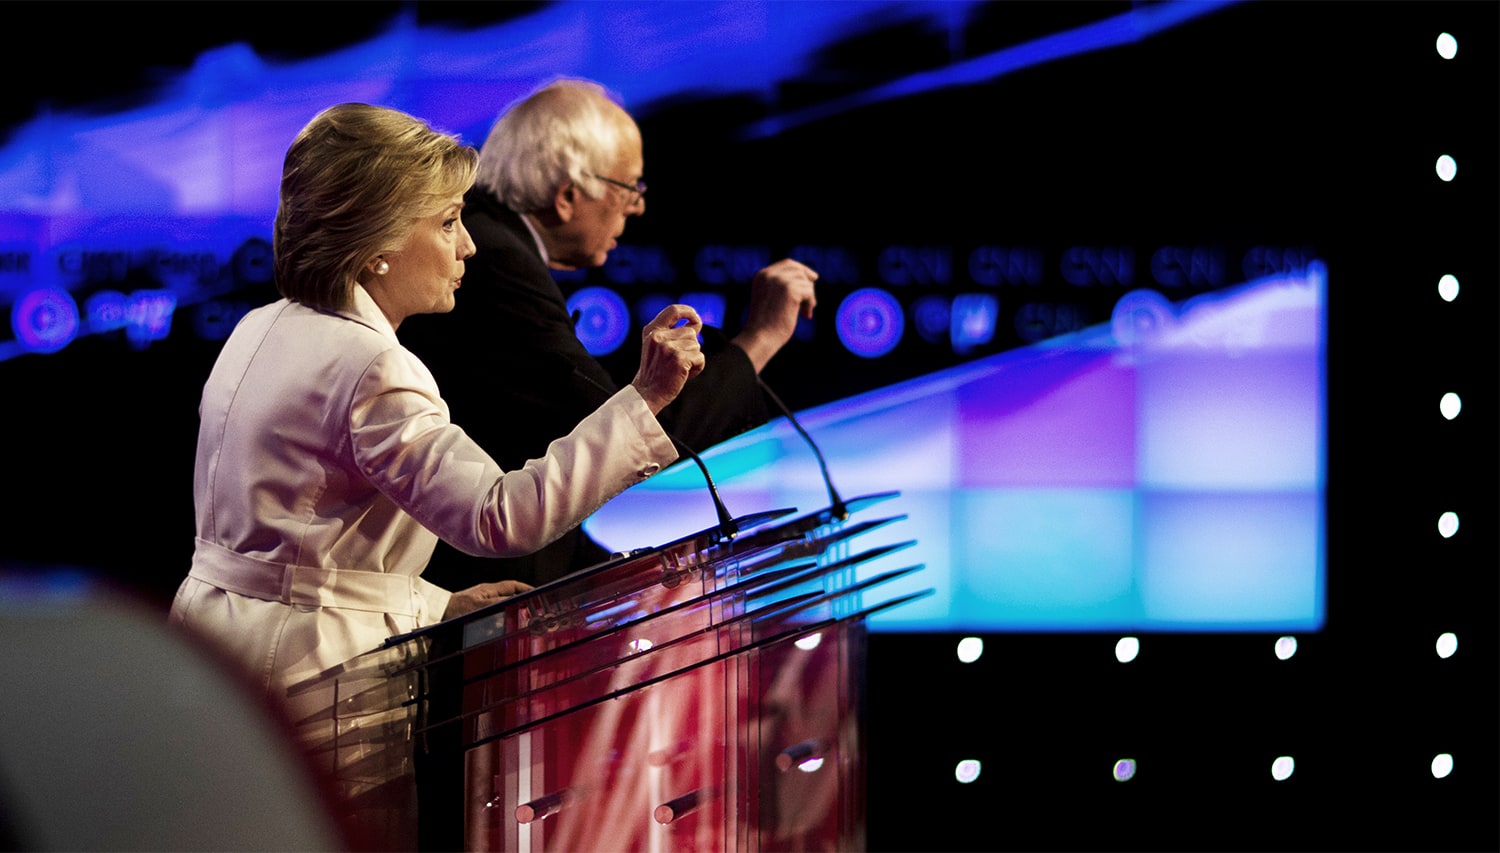 NEW YORK -- APRIL 14: Presidential candidates Hillary Clinton and Bernie Sanders debating at CNN Brooklyn Navy Yard Democratic Debate, New York, New York, April 14, 2016. (Photo by David Hume Kennerly/GettyImages)